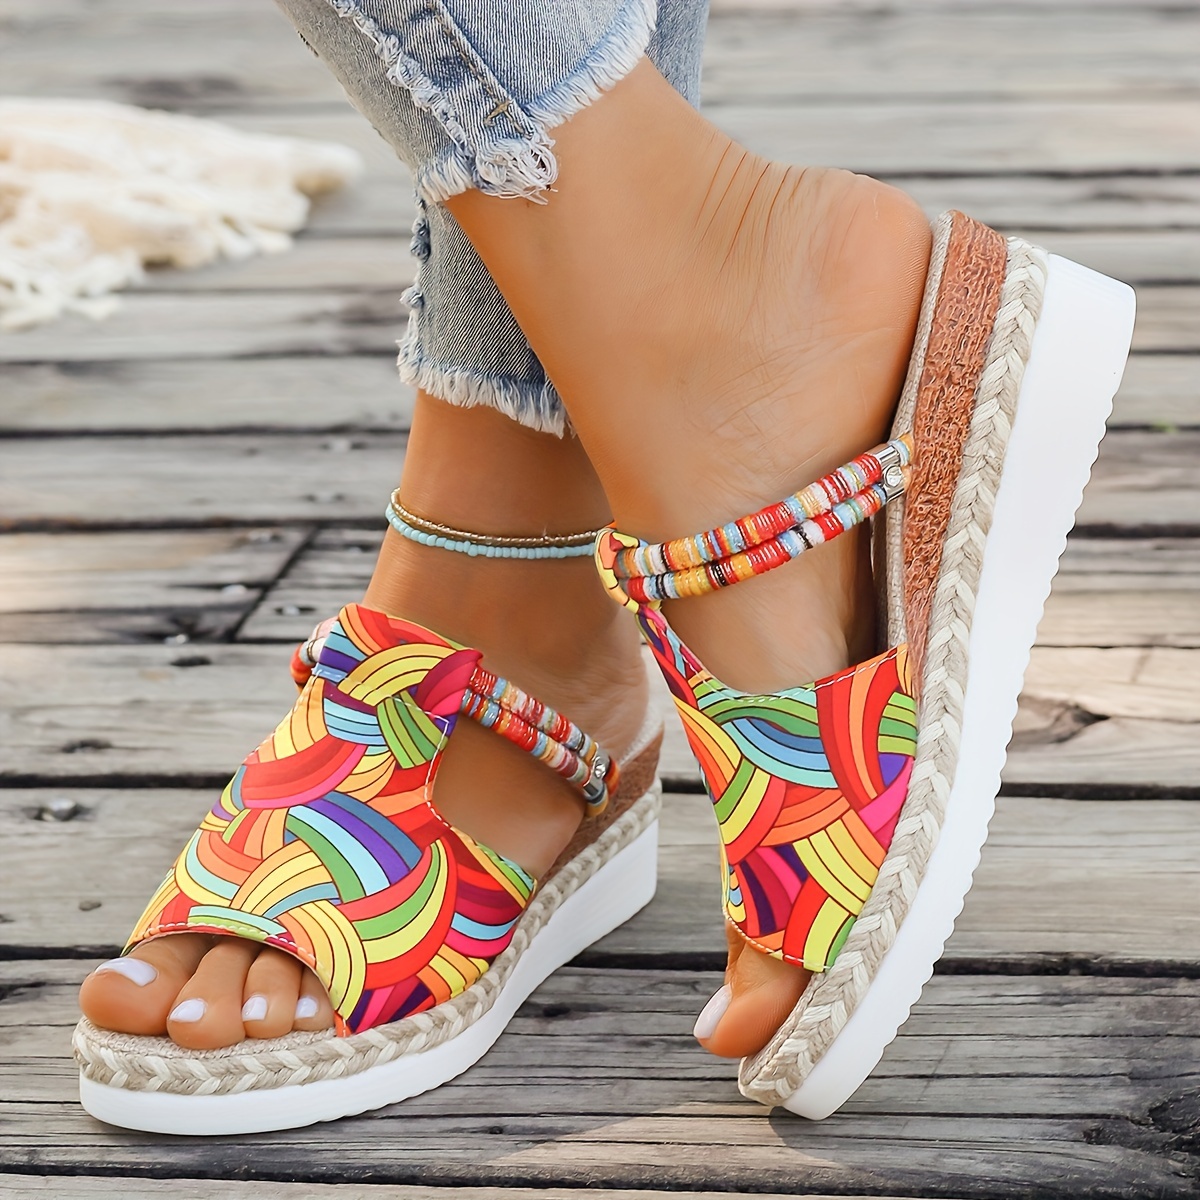 

Women's Summer Colorful Graffiti Wedge Sandals, Slip-on Espadrille High Heel Platform Slides With Braided Details For Beach Outing